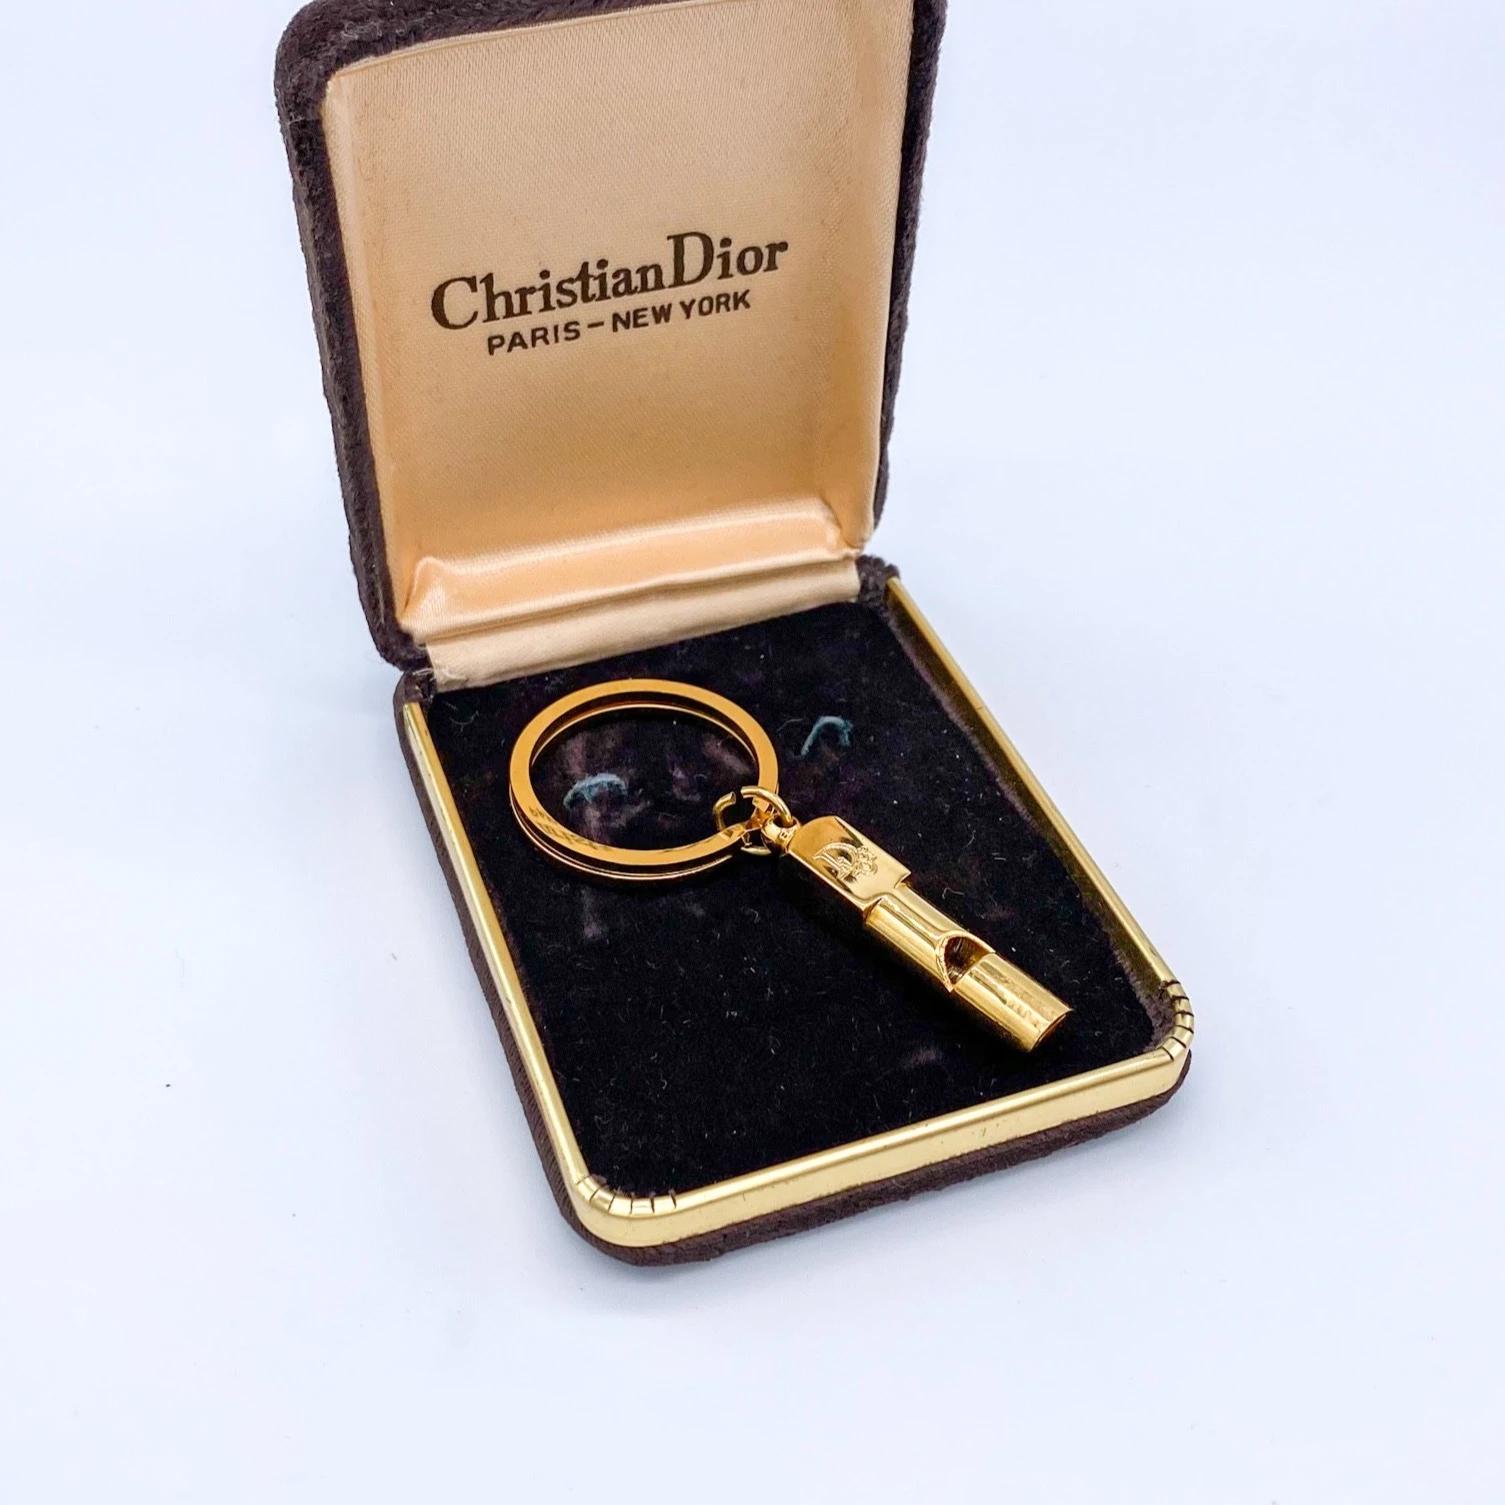 Christian Dior 1970s Vintage Whistle Keyring

A fantastic collectable piece from the 70s archive of Dior, still one of the most desirable fashion labels today.

Detail
-Cast from gold plated metal
-Whistle shaped pendant 
-Can be used as a keychain